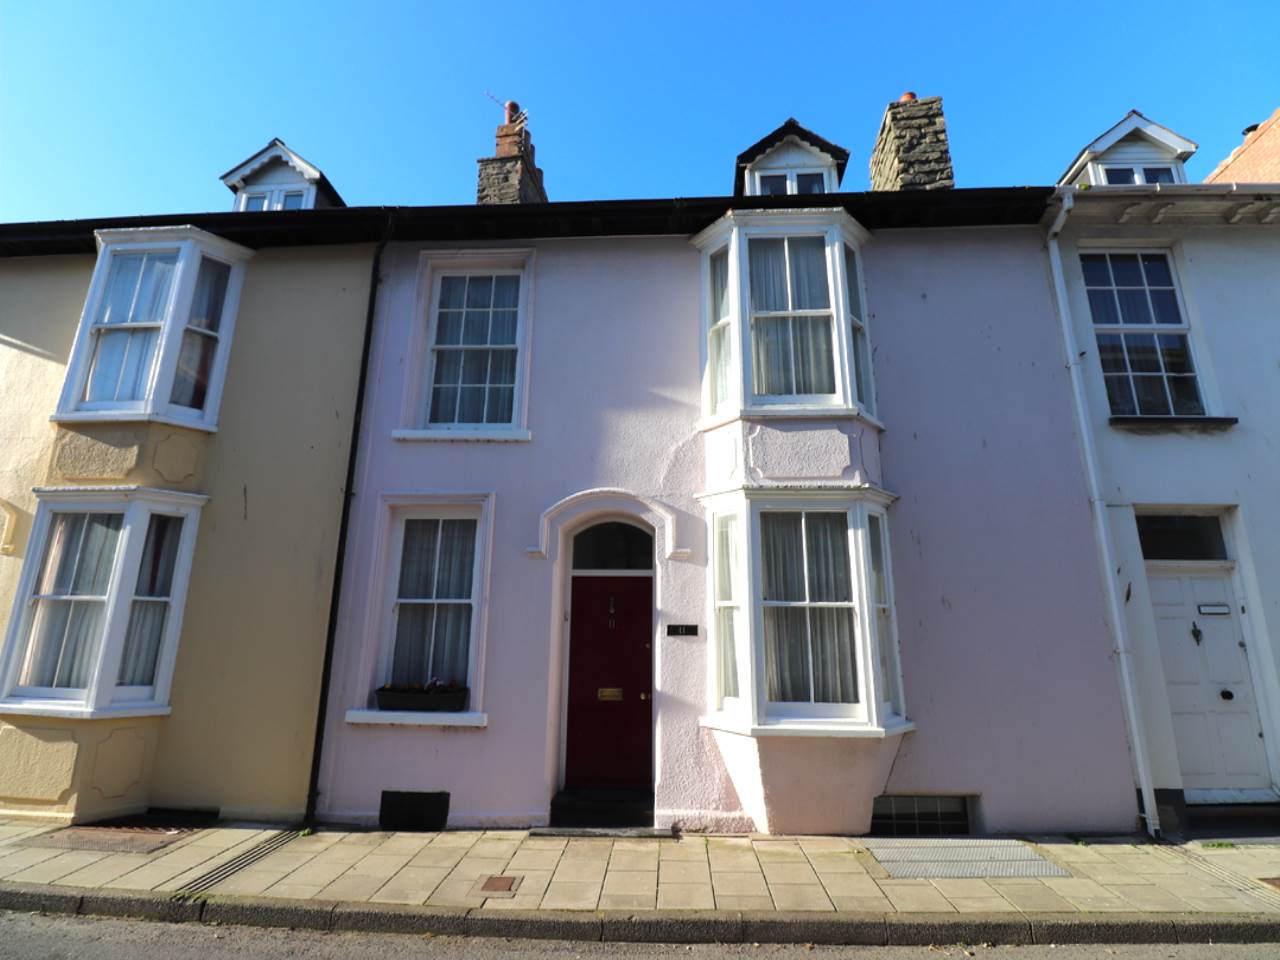 4 bed terraced house for sale in New Street, Aberystwyth, SY23